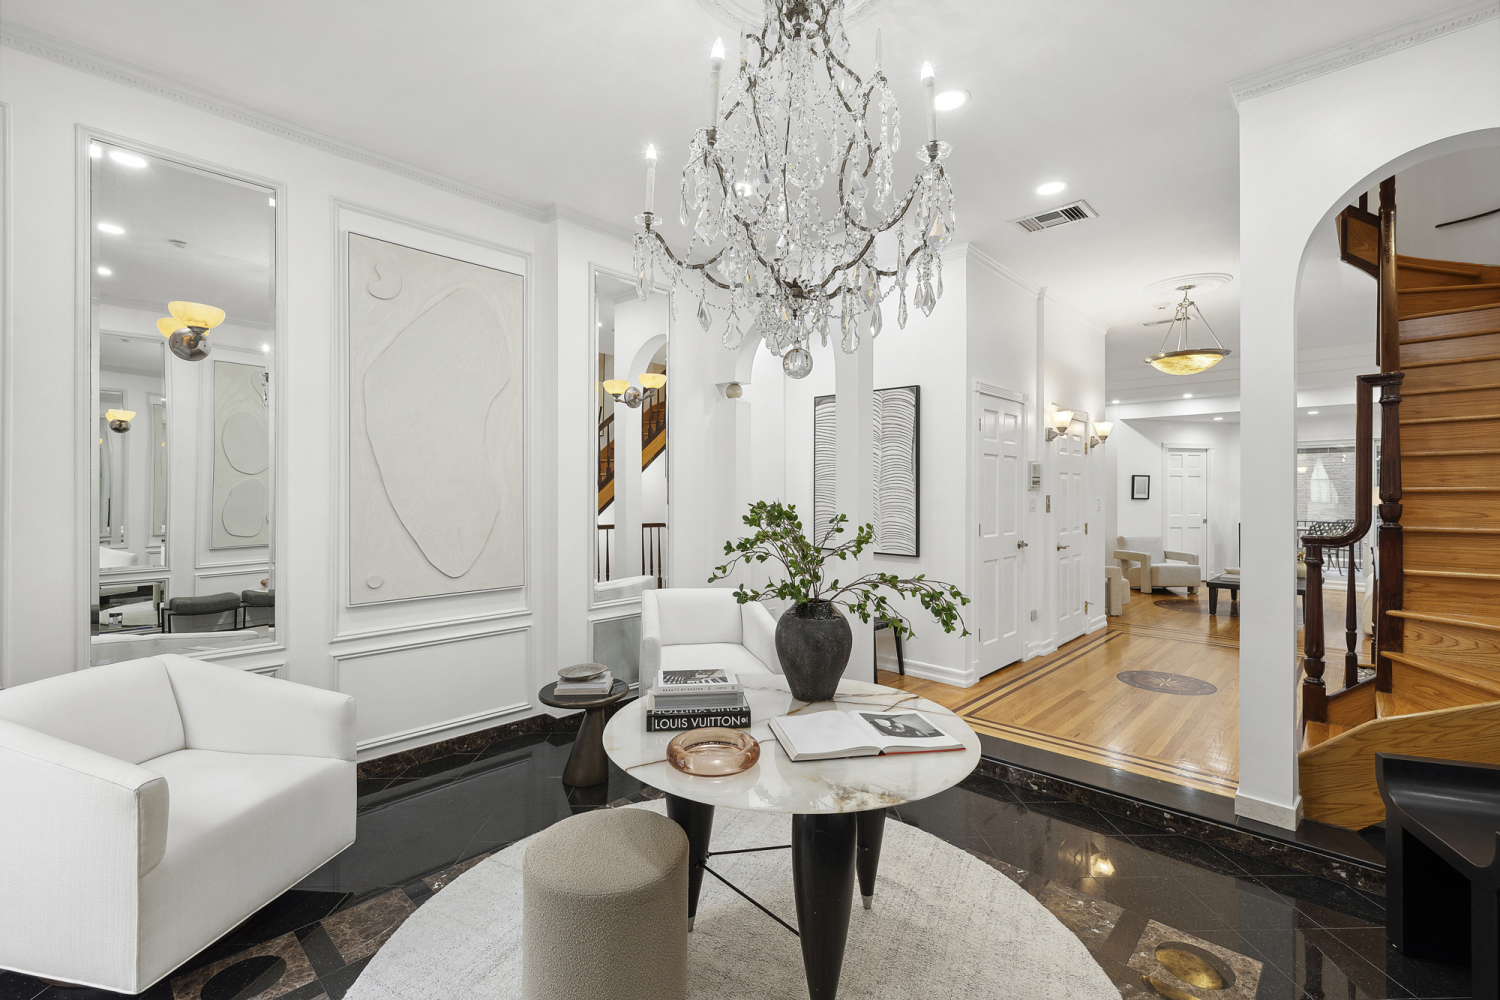 132 East 36th Street, Murray Hill, Midtown East, NYC - 6 Bedrooms  
8.5 Bathrooms  
10 Rooms - 